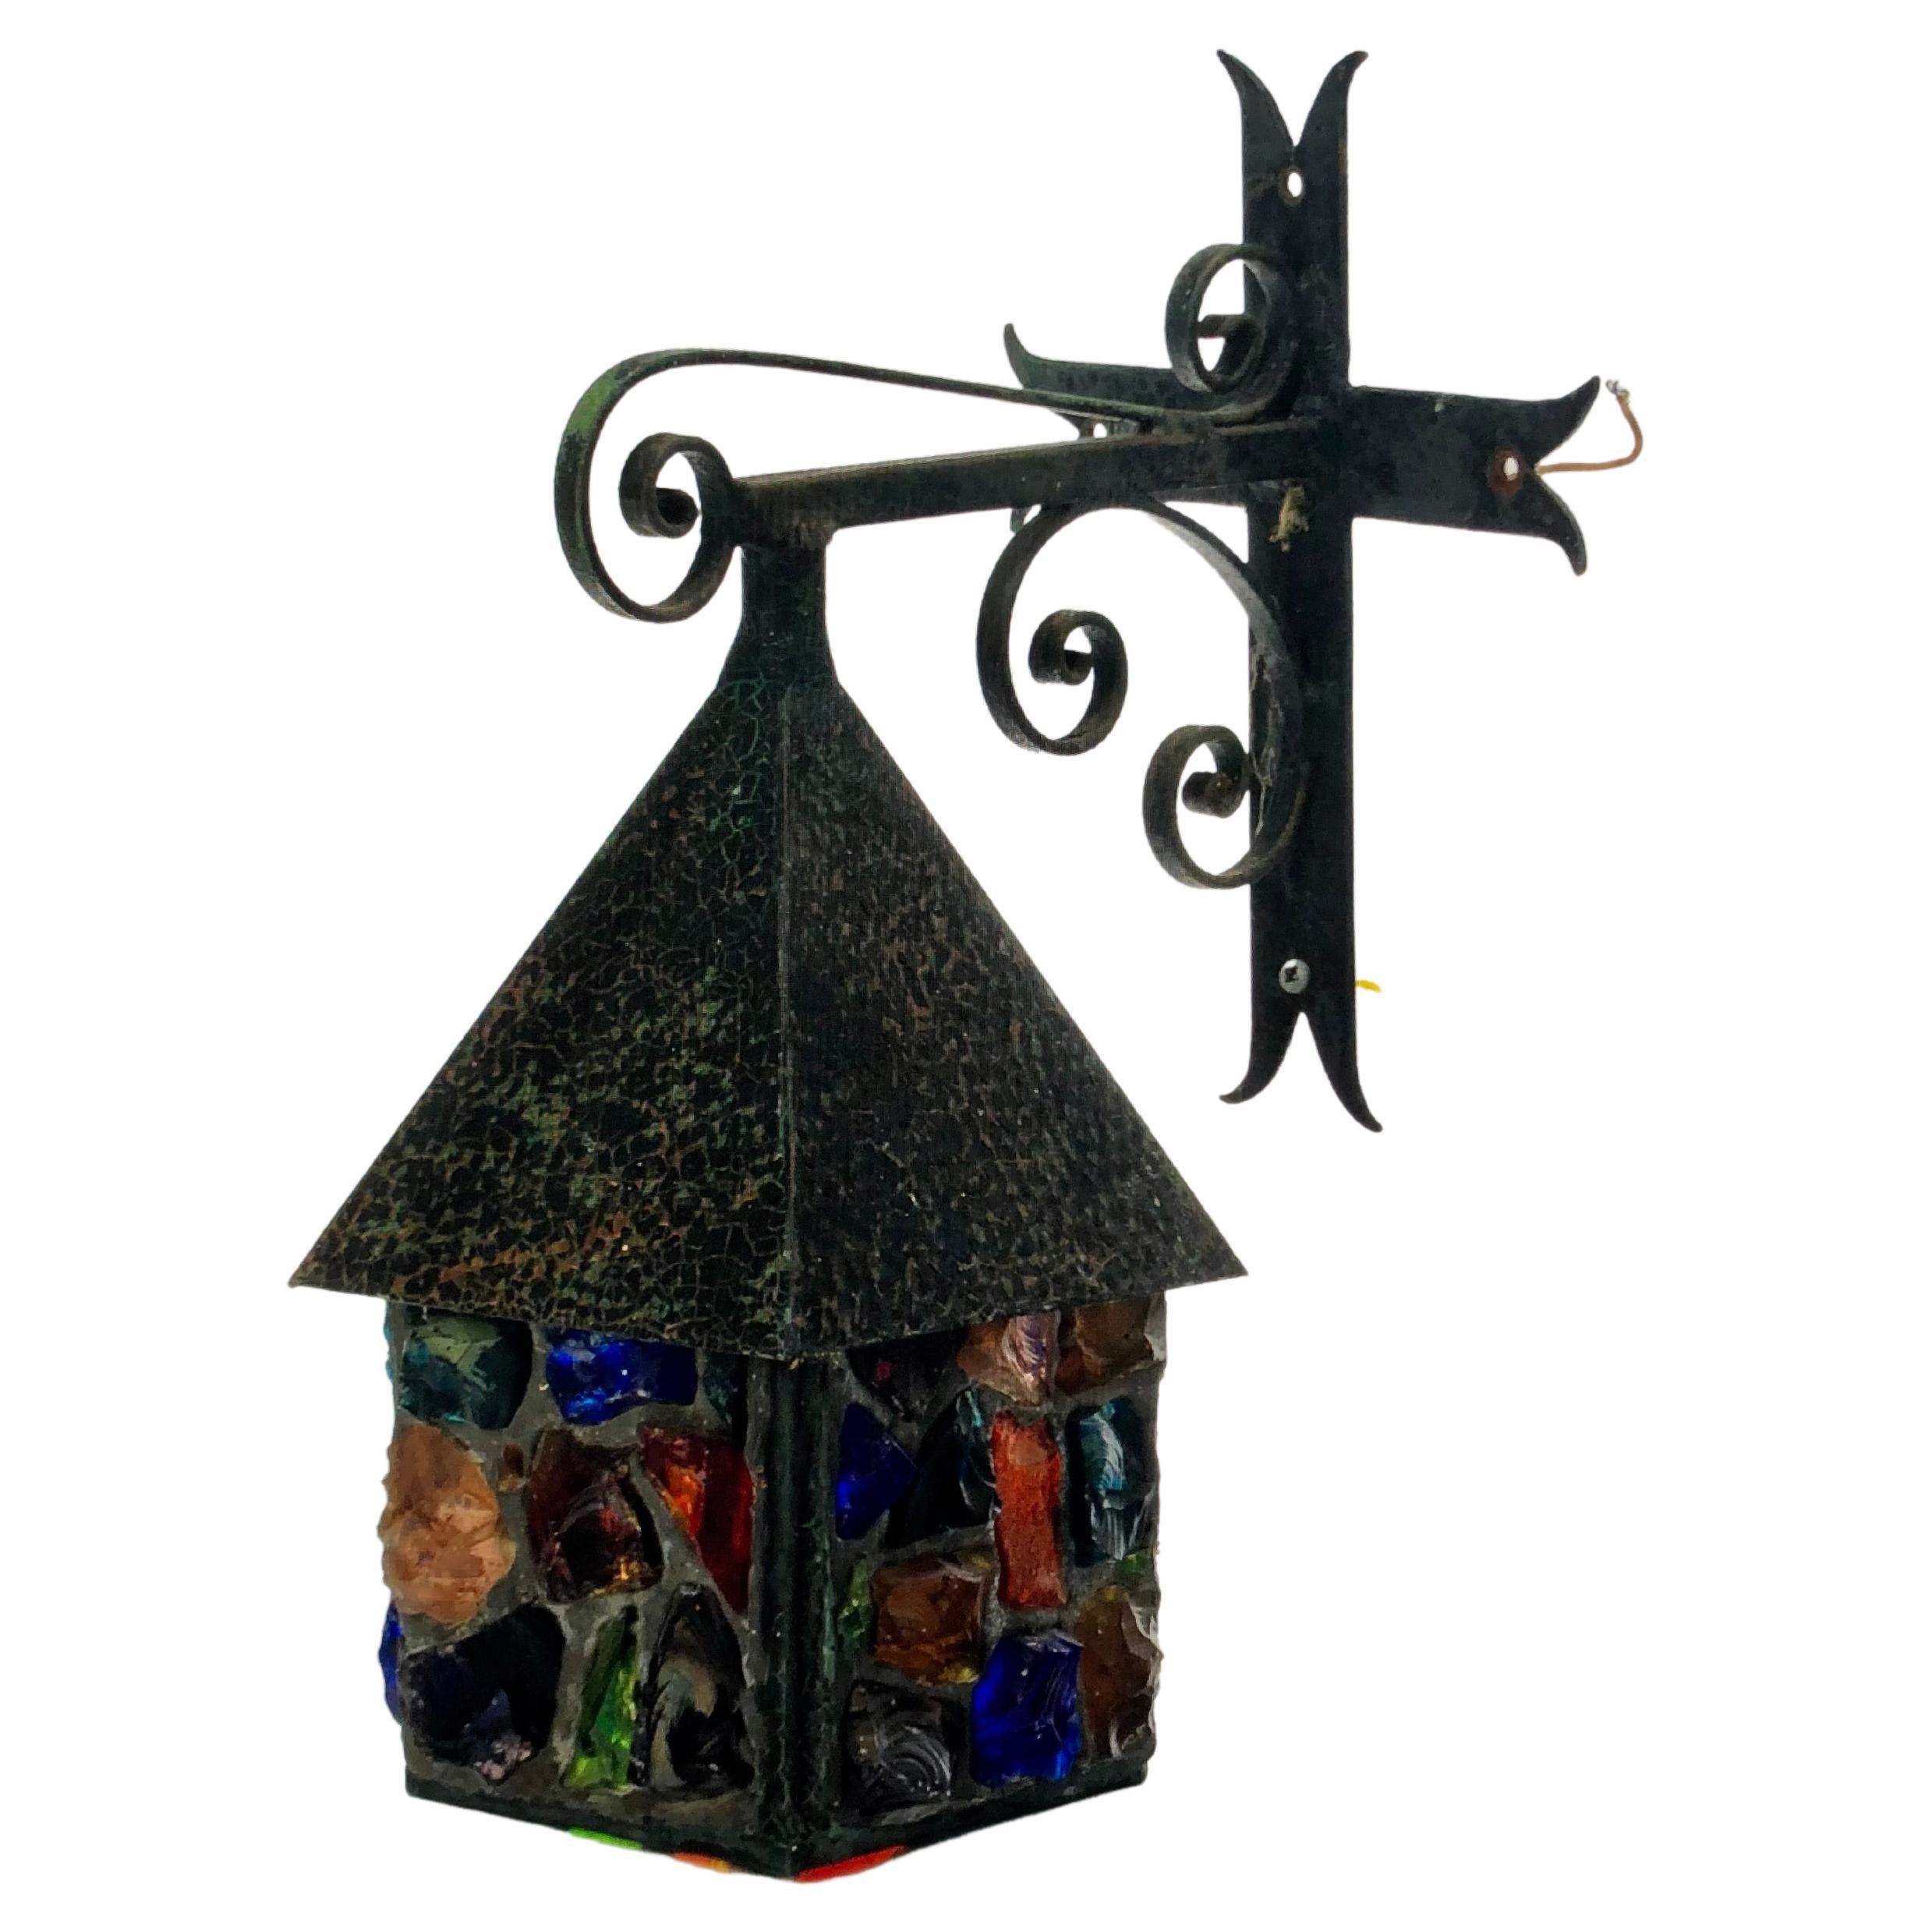  Mid-Century Iron and Glass Lantern in the Arts & Crafts style by Peter Marsh